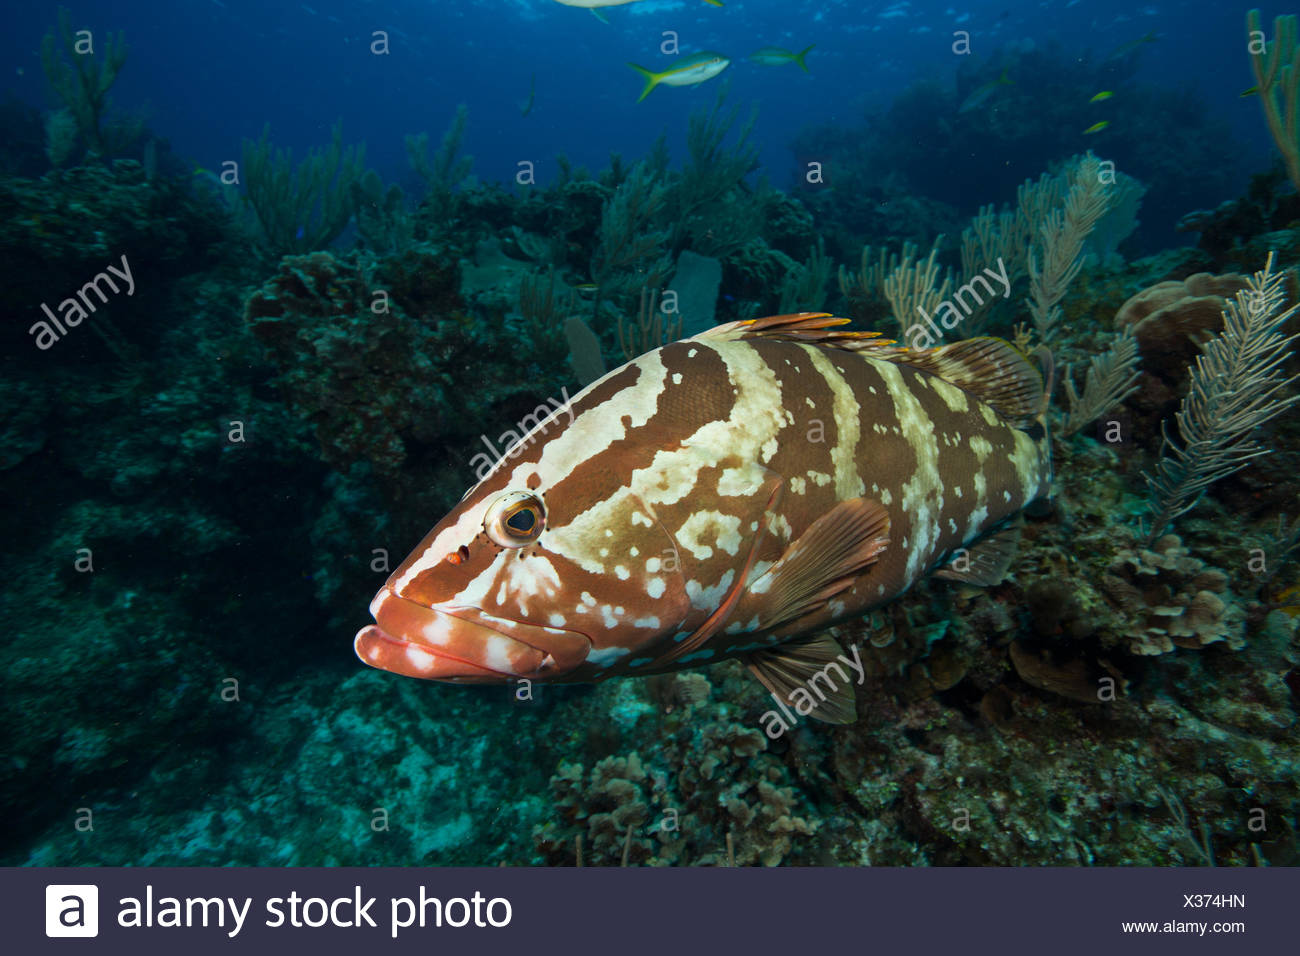 Nassau Grouper High Resolution Stock Photography and Images - Alamy